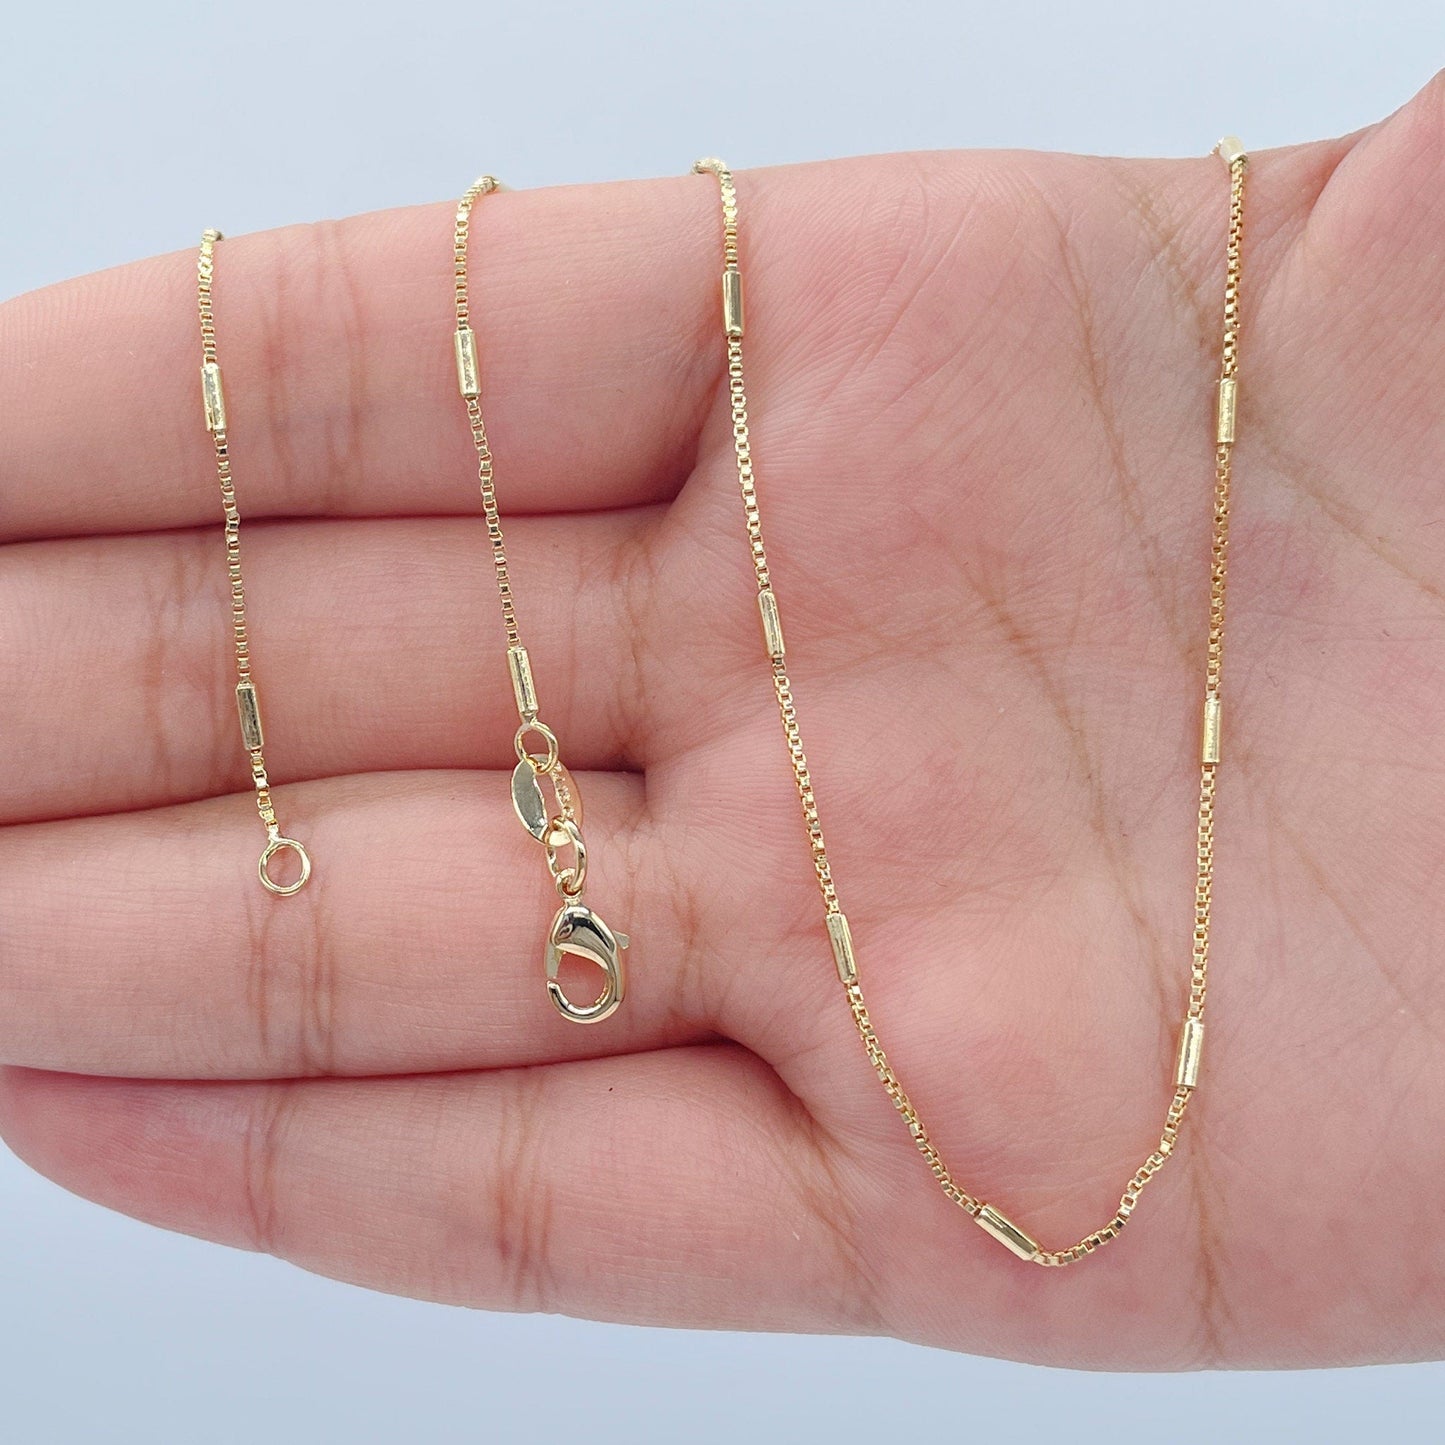 18k Gold Layered 1mm Dainty Interspersed Bar Dash Box Chain Necklace for